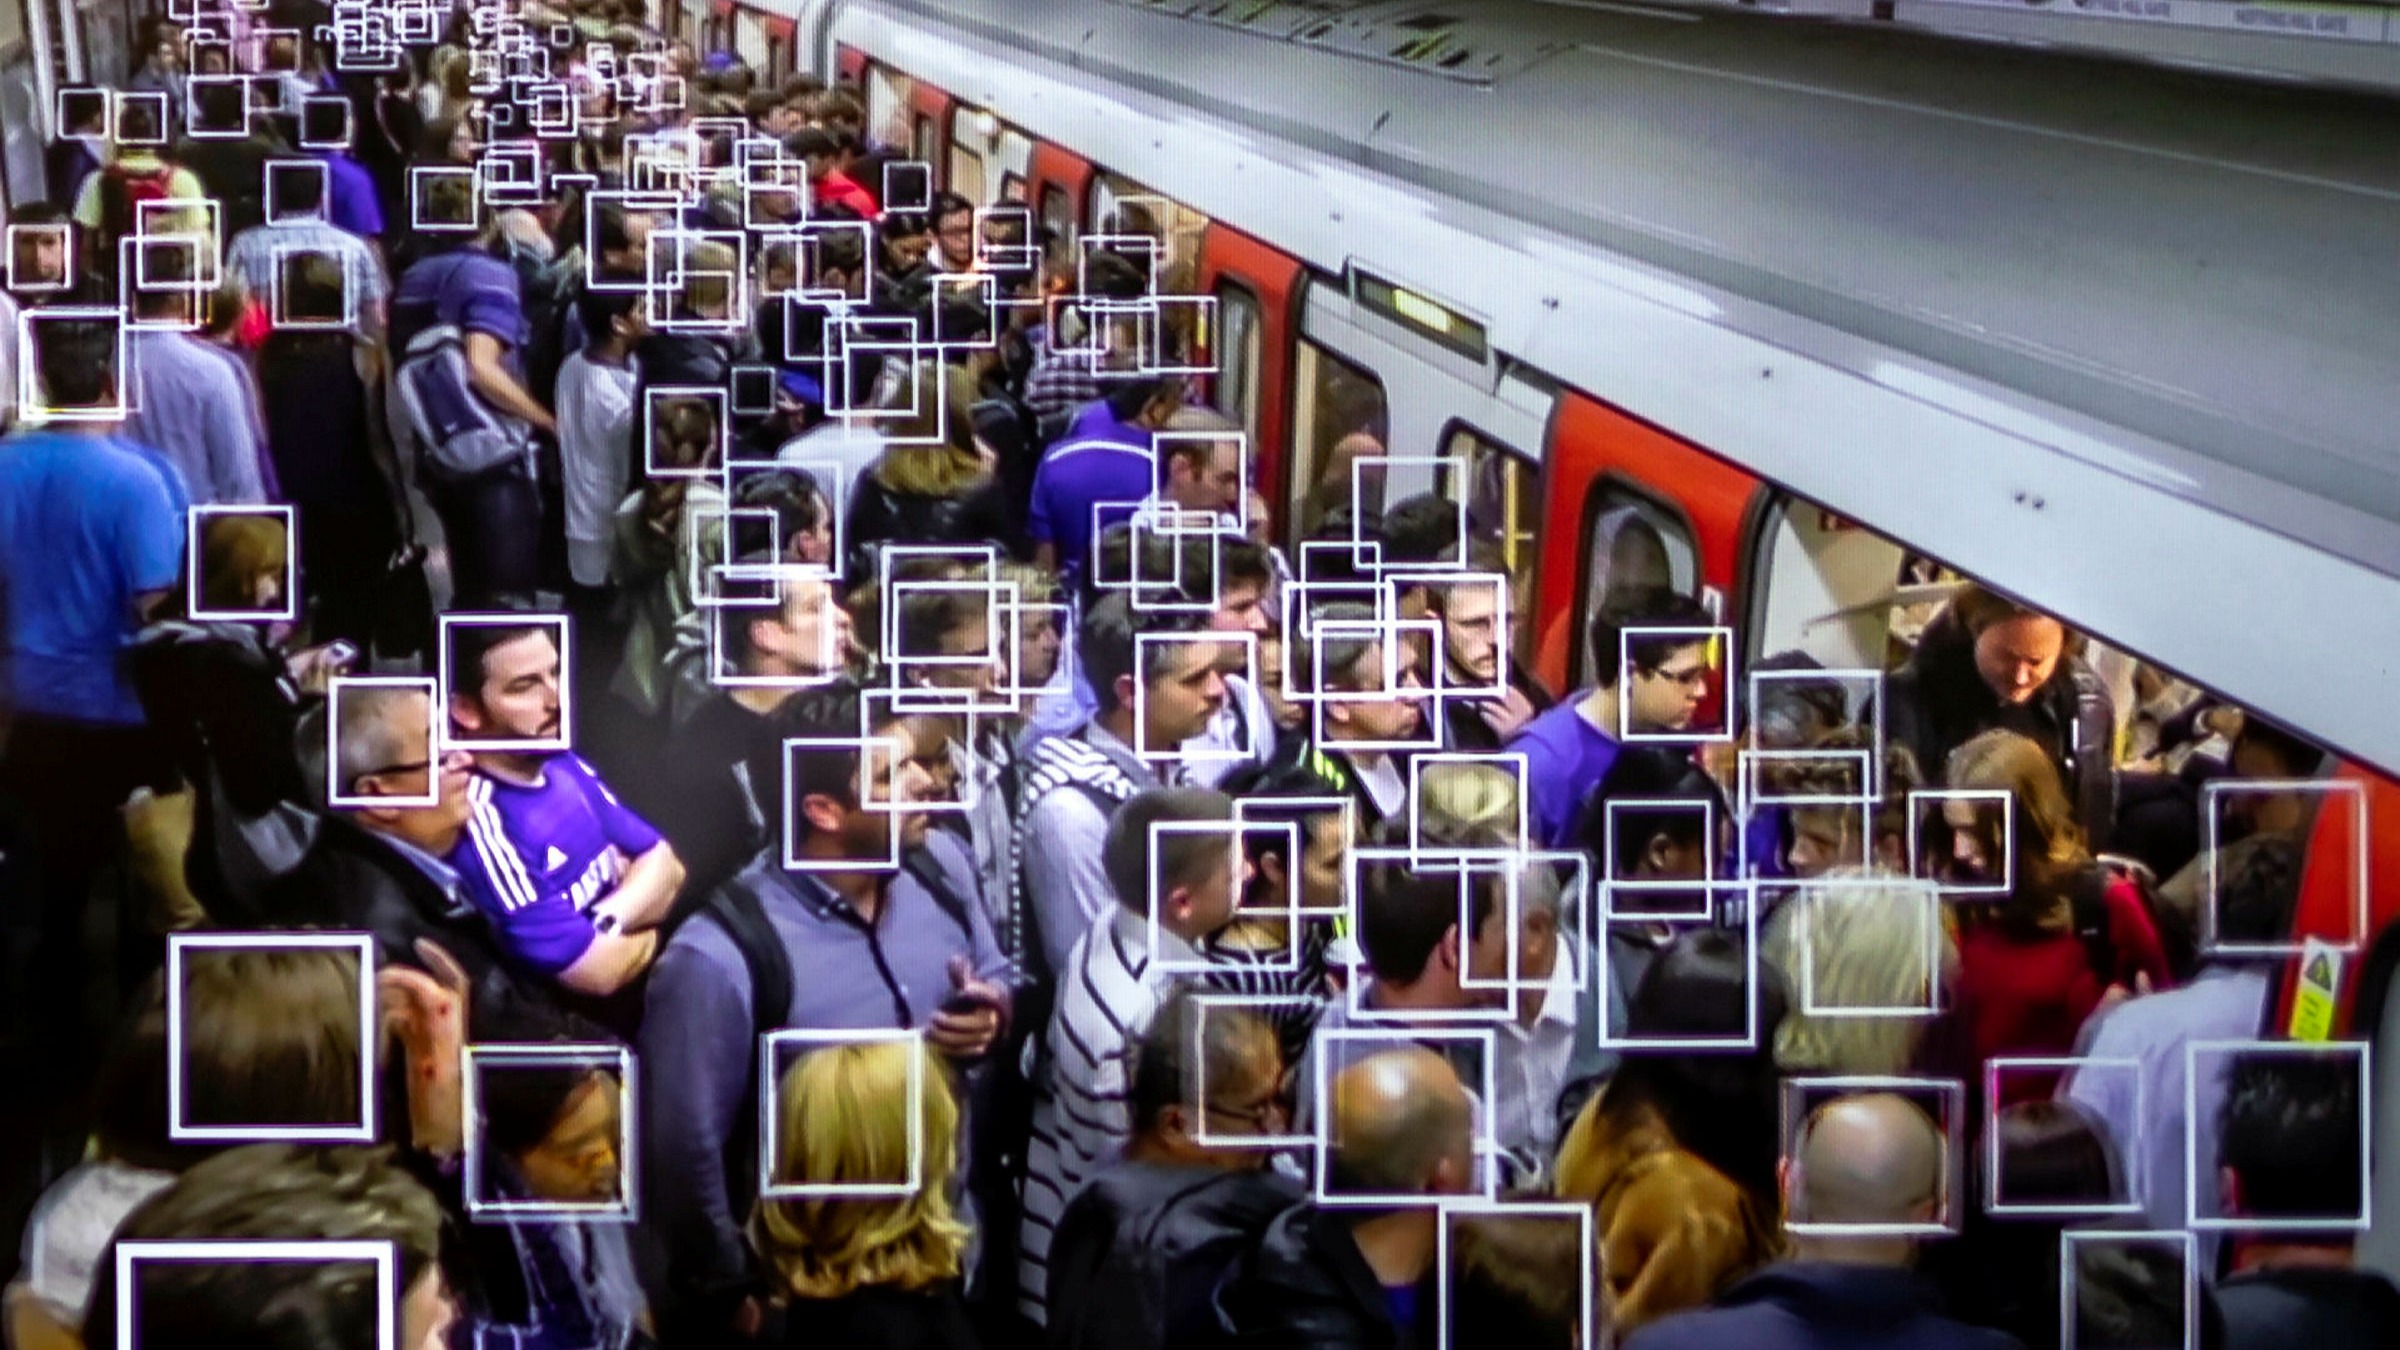 Digital analysing faces in a crowd